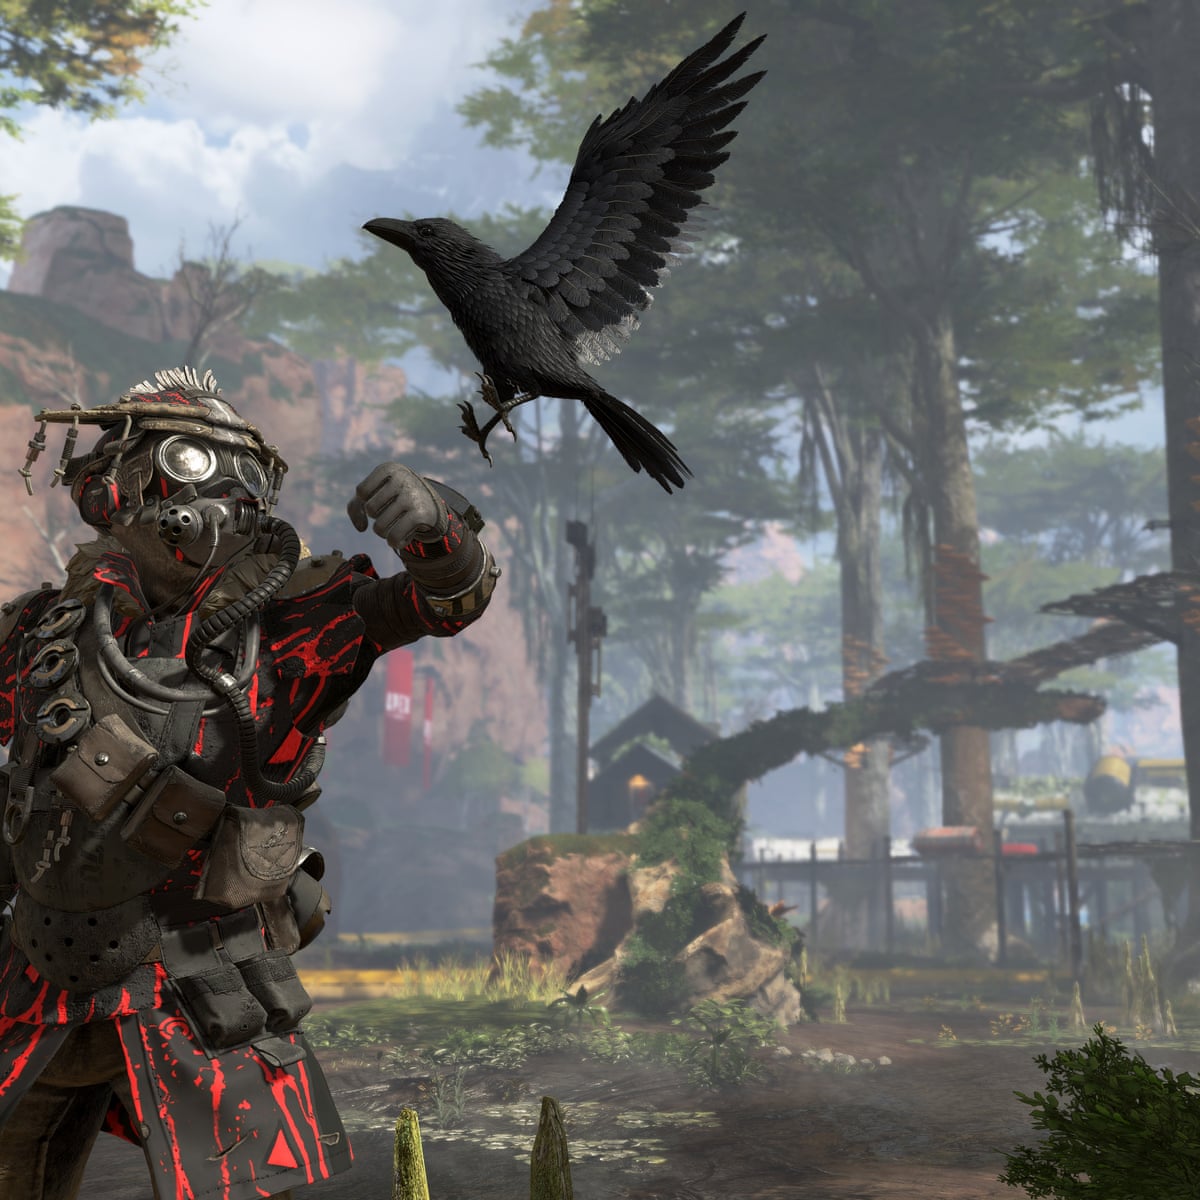 Why Apex Legends has kept me playing for 500 hours